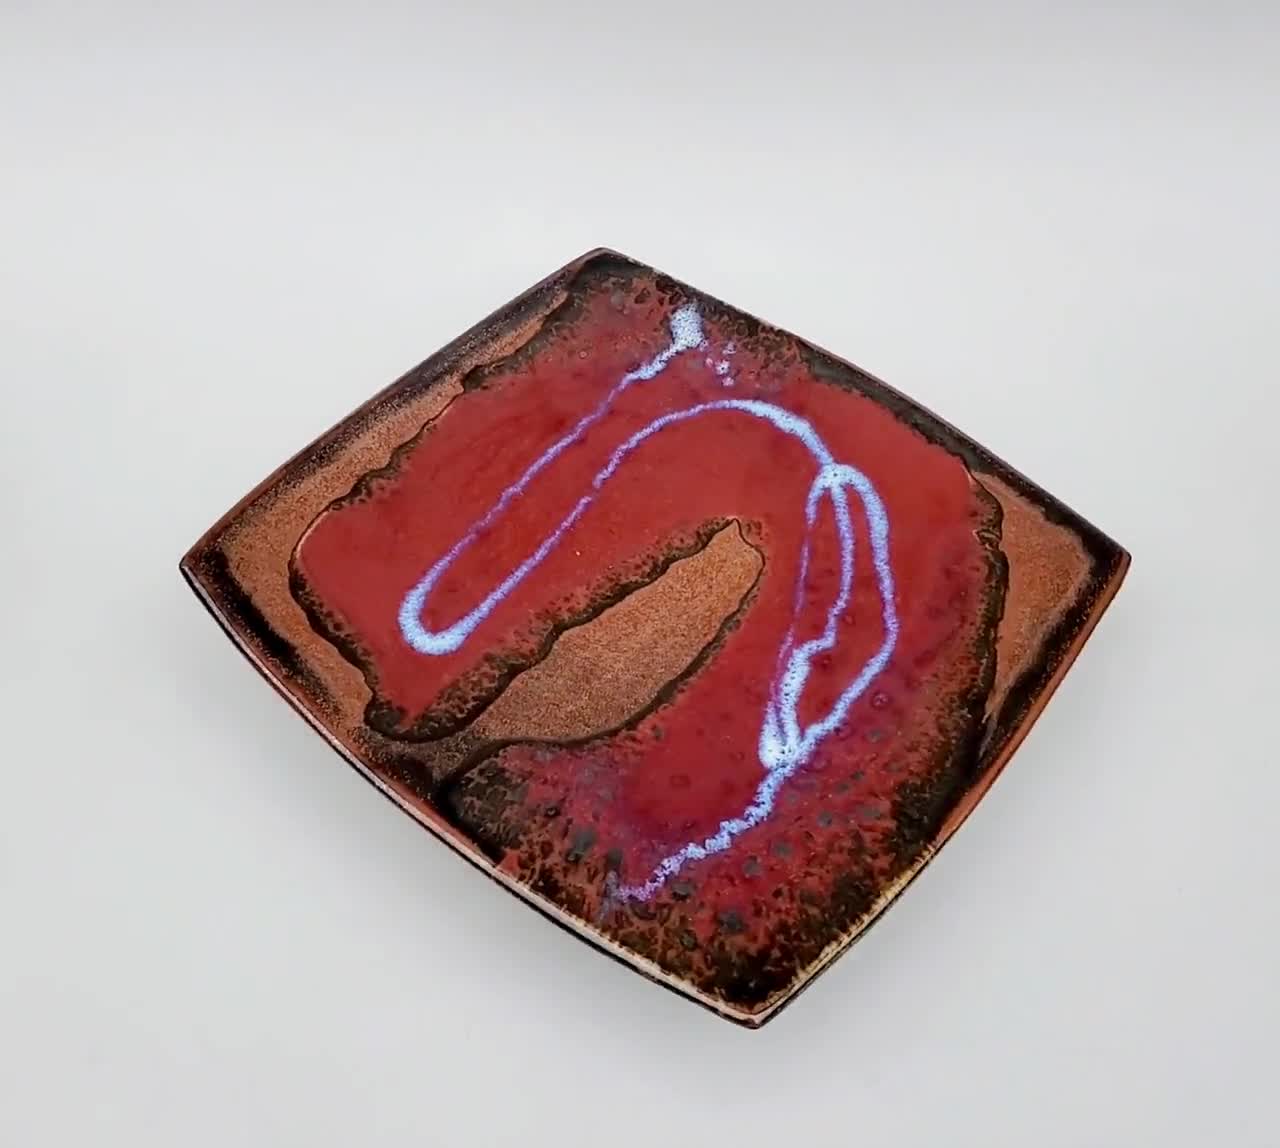 Neely and George Tomkins - Yuma Arizona Studio Pottery Decorated Plate -  Oxblood Red Glaze + Tenmoku Brown - Square Mid Century Design